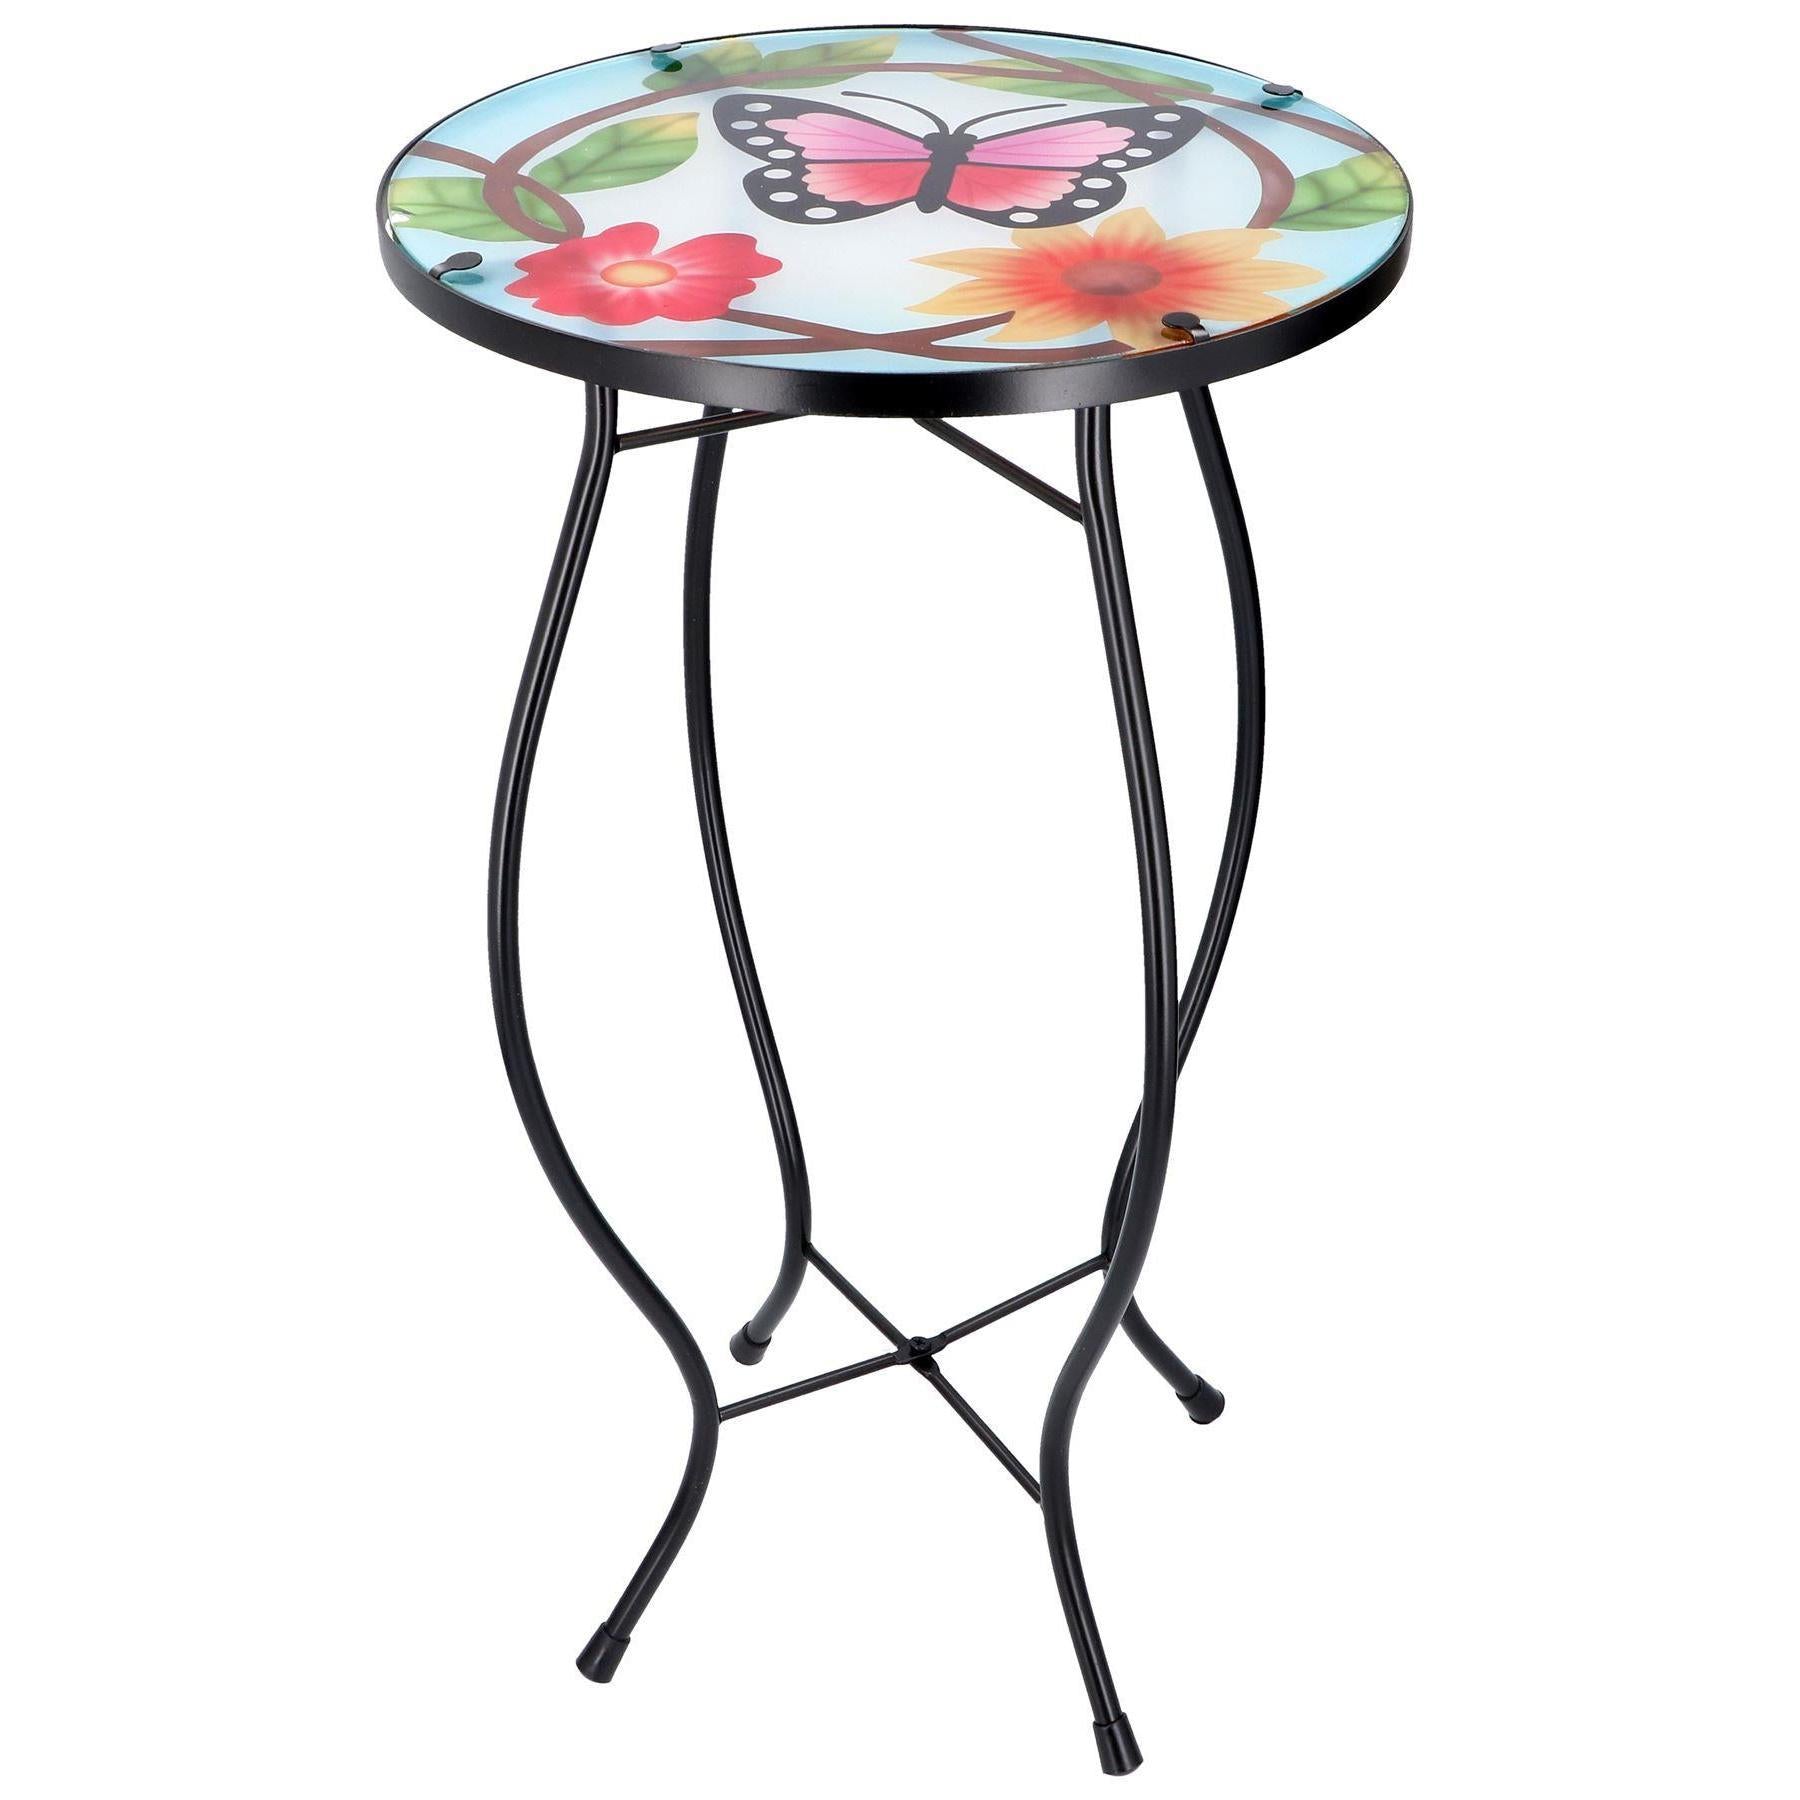 GEEZY Round Side Mosaic Table With Small Butterfly Design